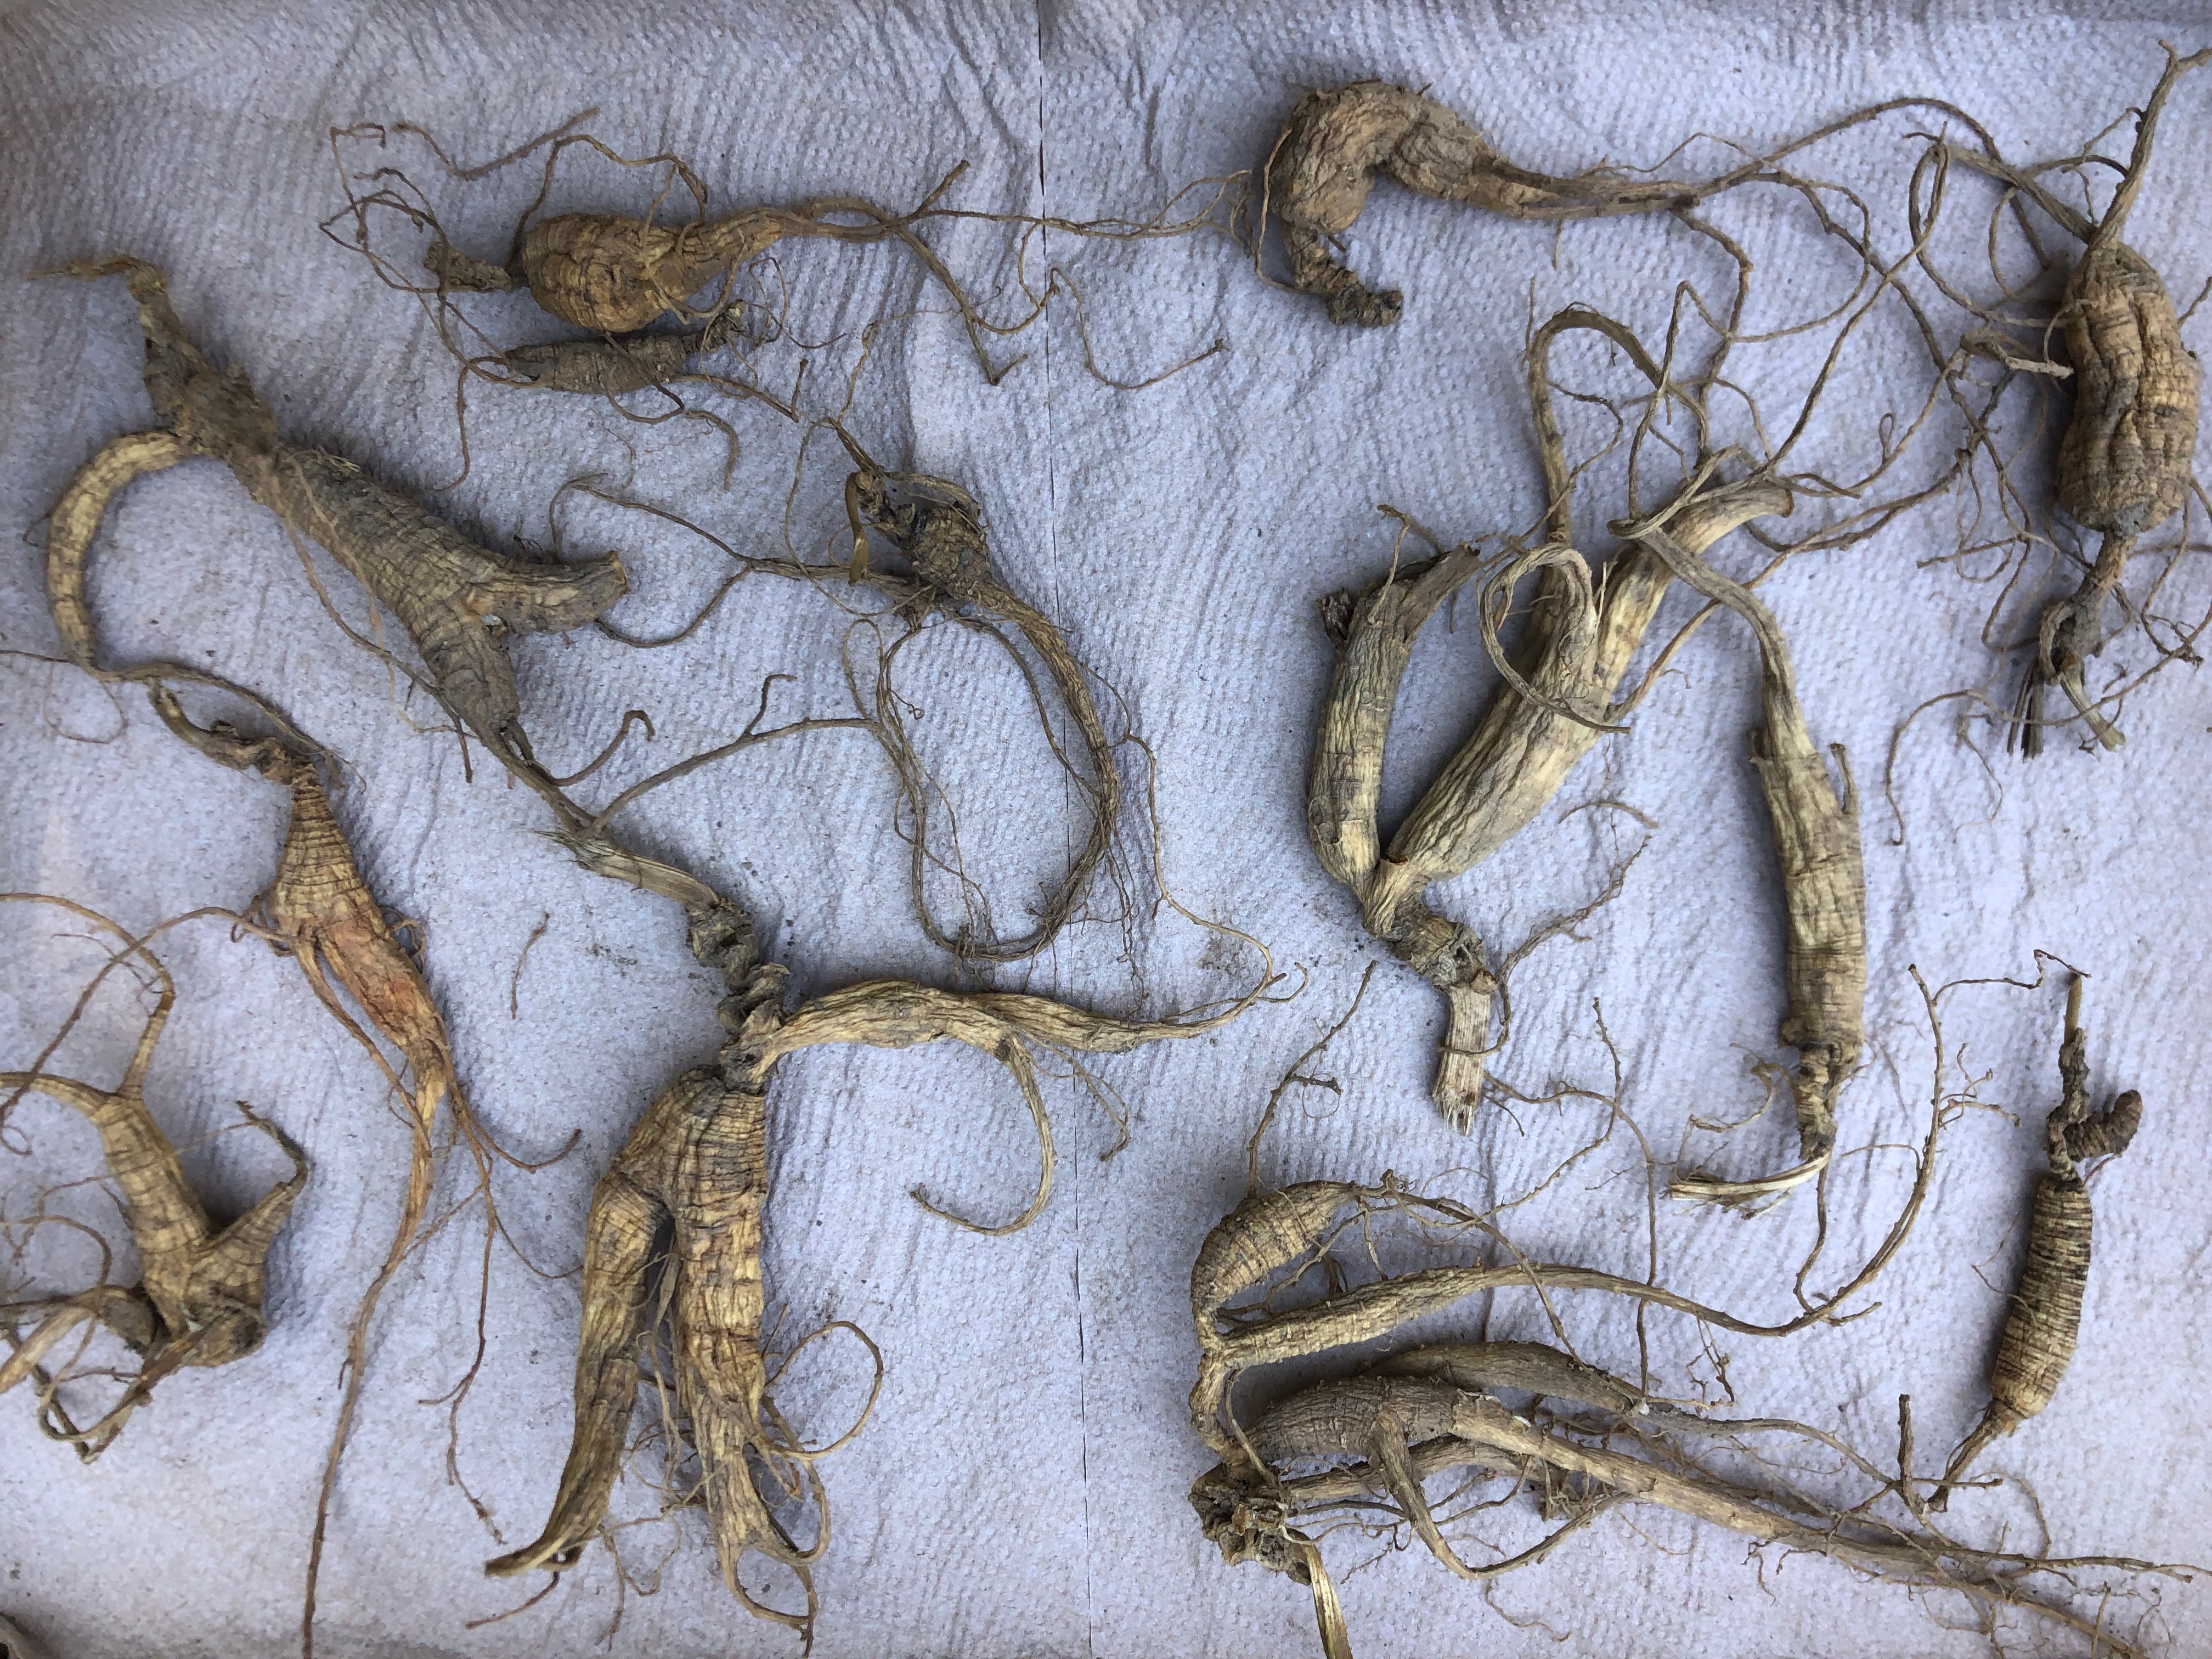 Several mostly-dry ginseng roots are arranged on top of paper towels in a cardboard tray.